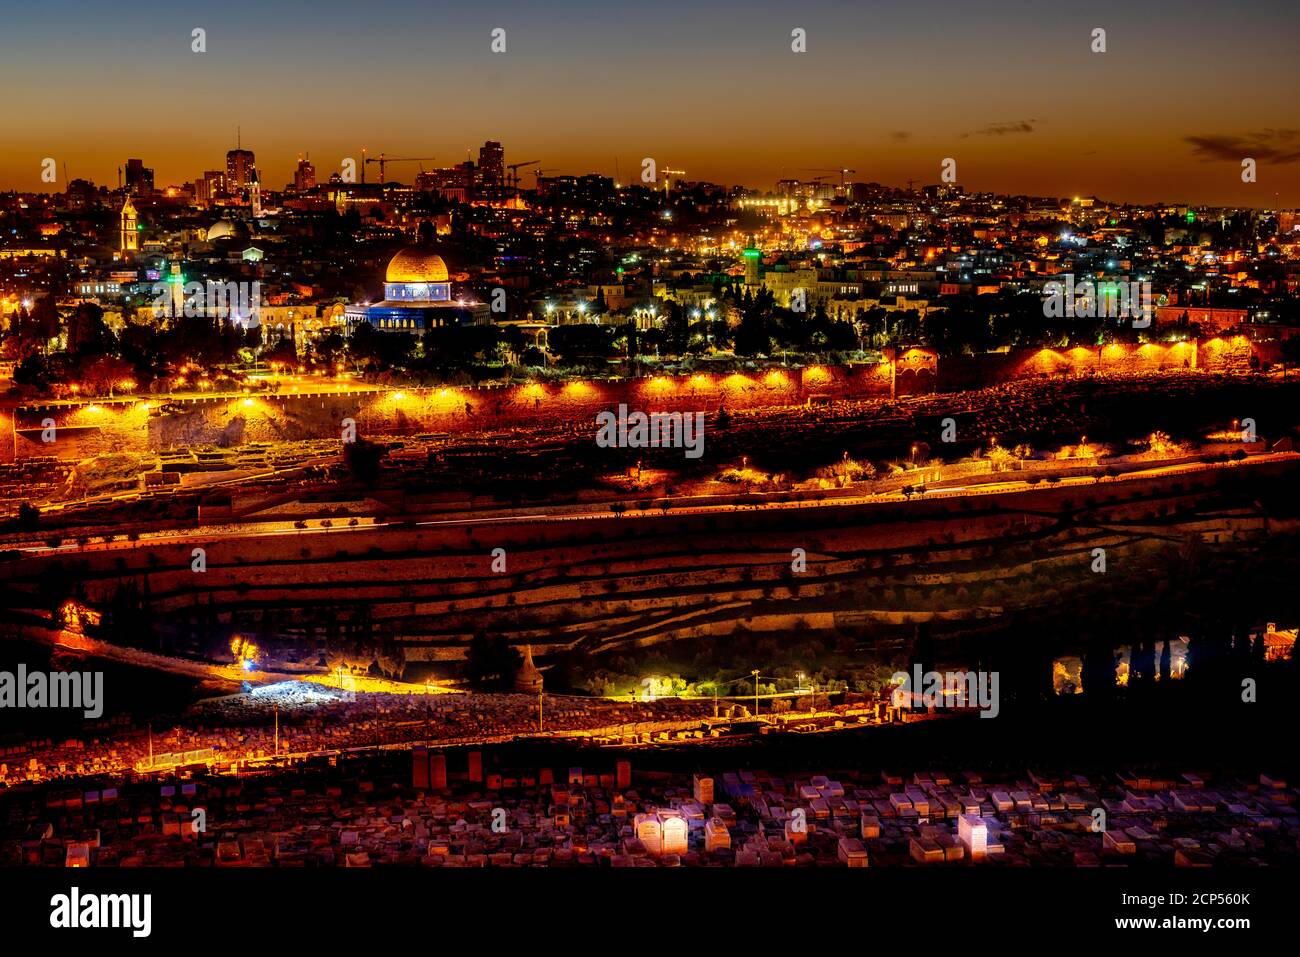 The city skyline illuminated at night from the Mount of Olives, Jerusalem, Israel, Middle East. Stock Photo